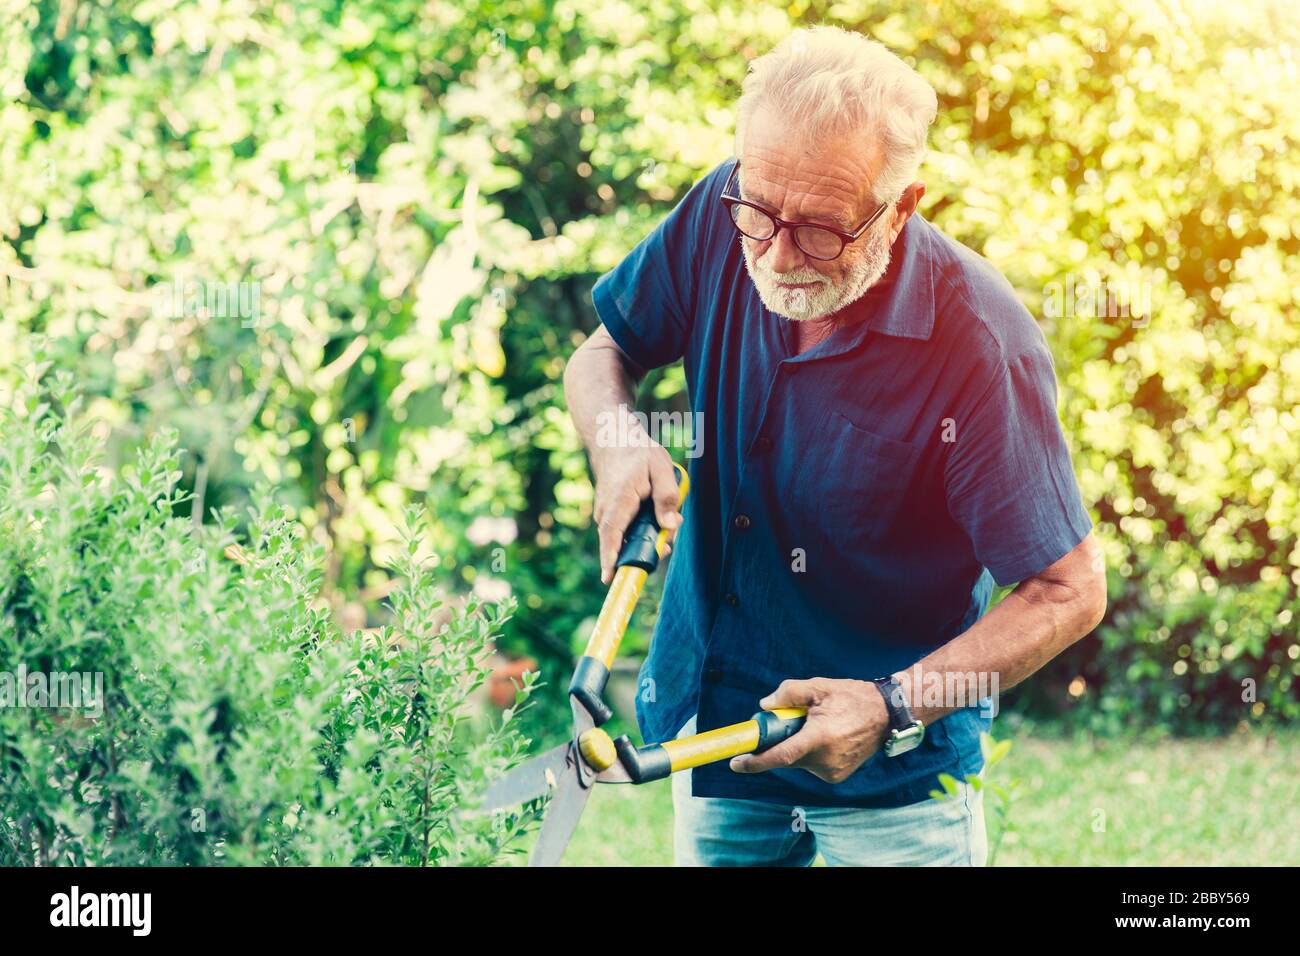 elder cut trim the bushes green shrub plant in the backyard park outdoor for hobby in holiday. Stock Photo